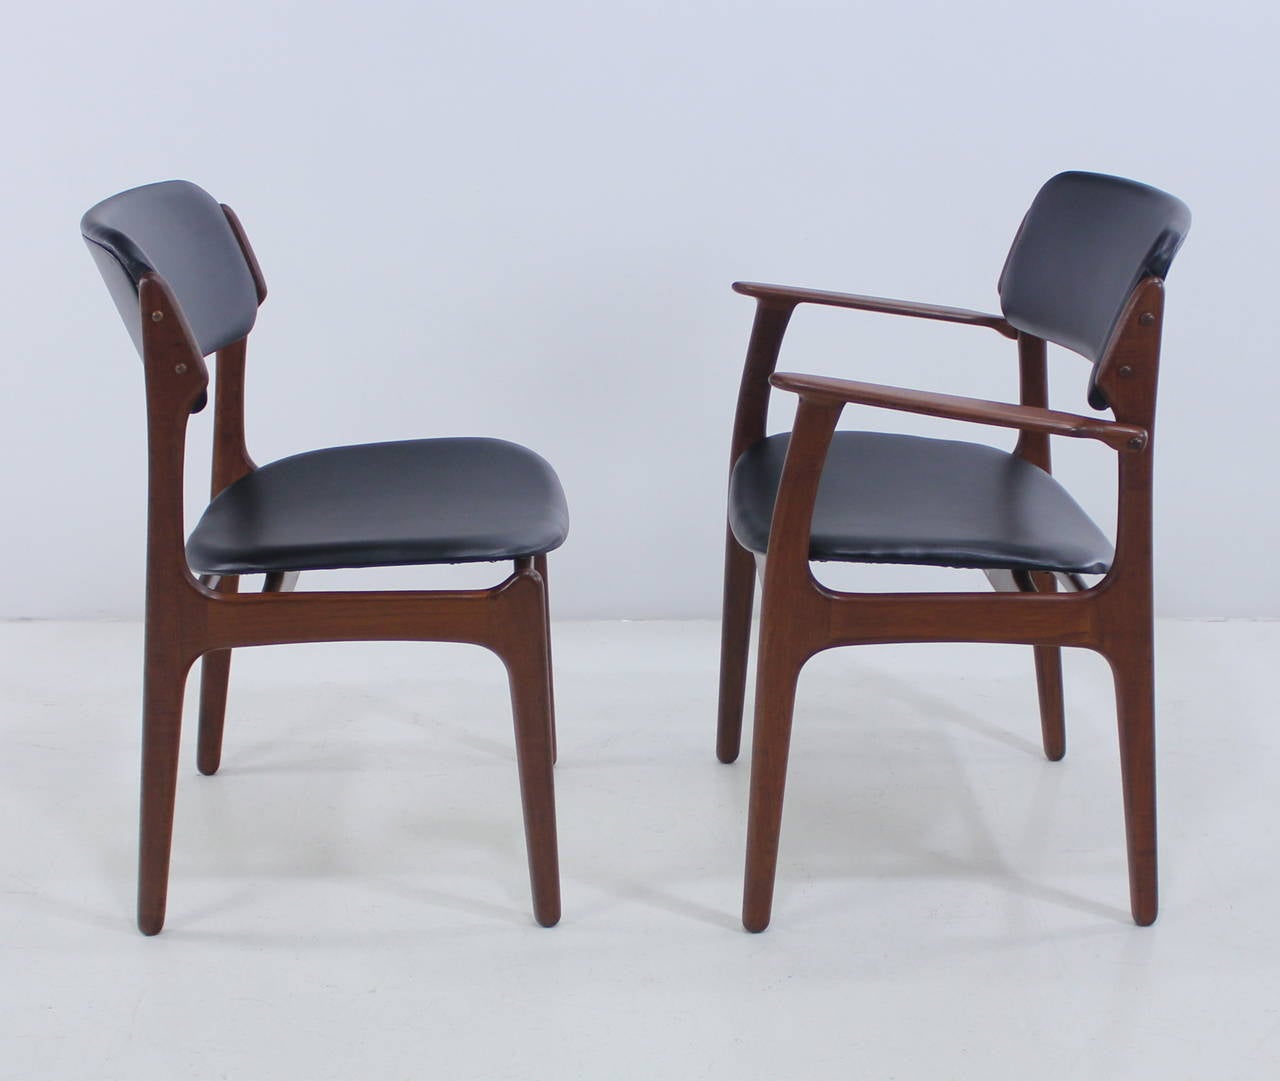 Rare Set of Eight Danish Modern Teak Dining Chairs Designed by Erik Buck In Excellent Condition For Sale In Portland, OR